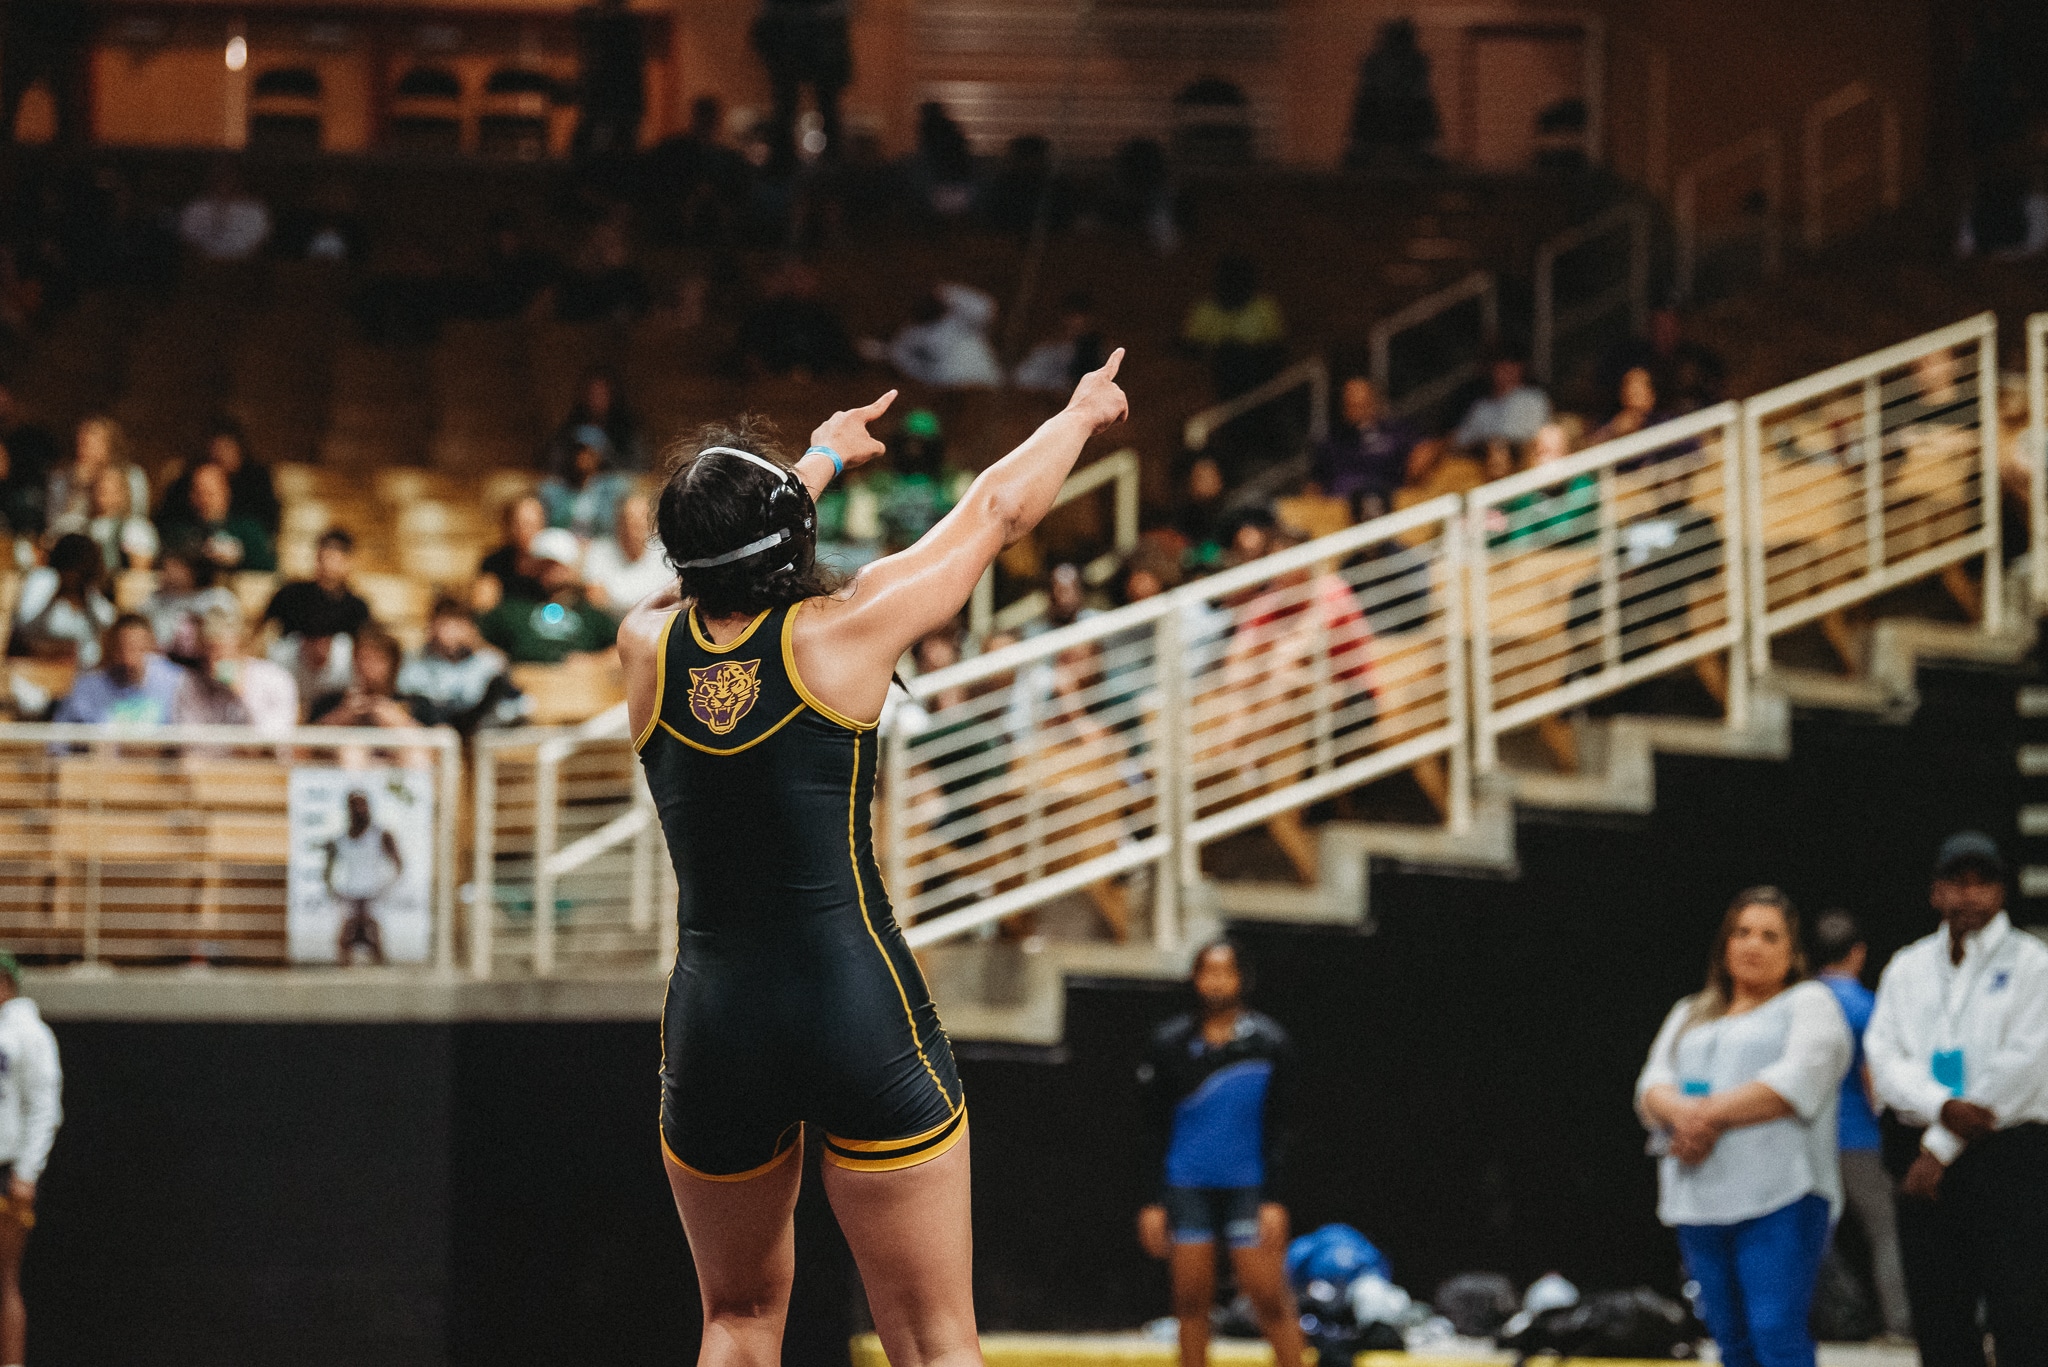 Grace Leota points to the crowd after winning her second state wrestling title. [Credit: Cynthia Leota]
